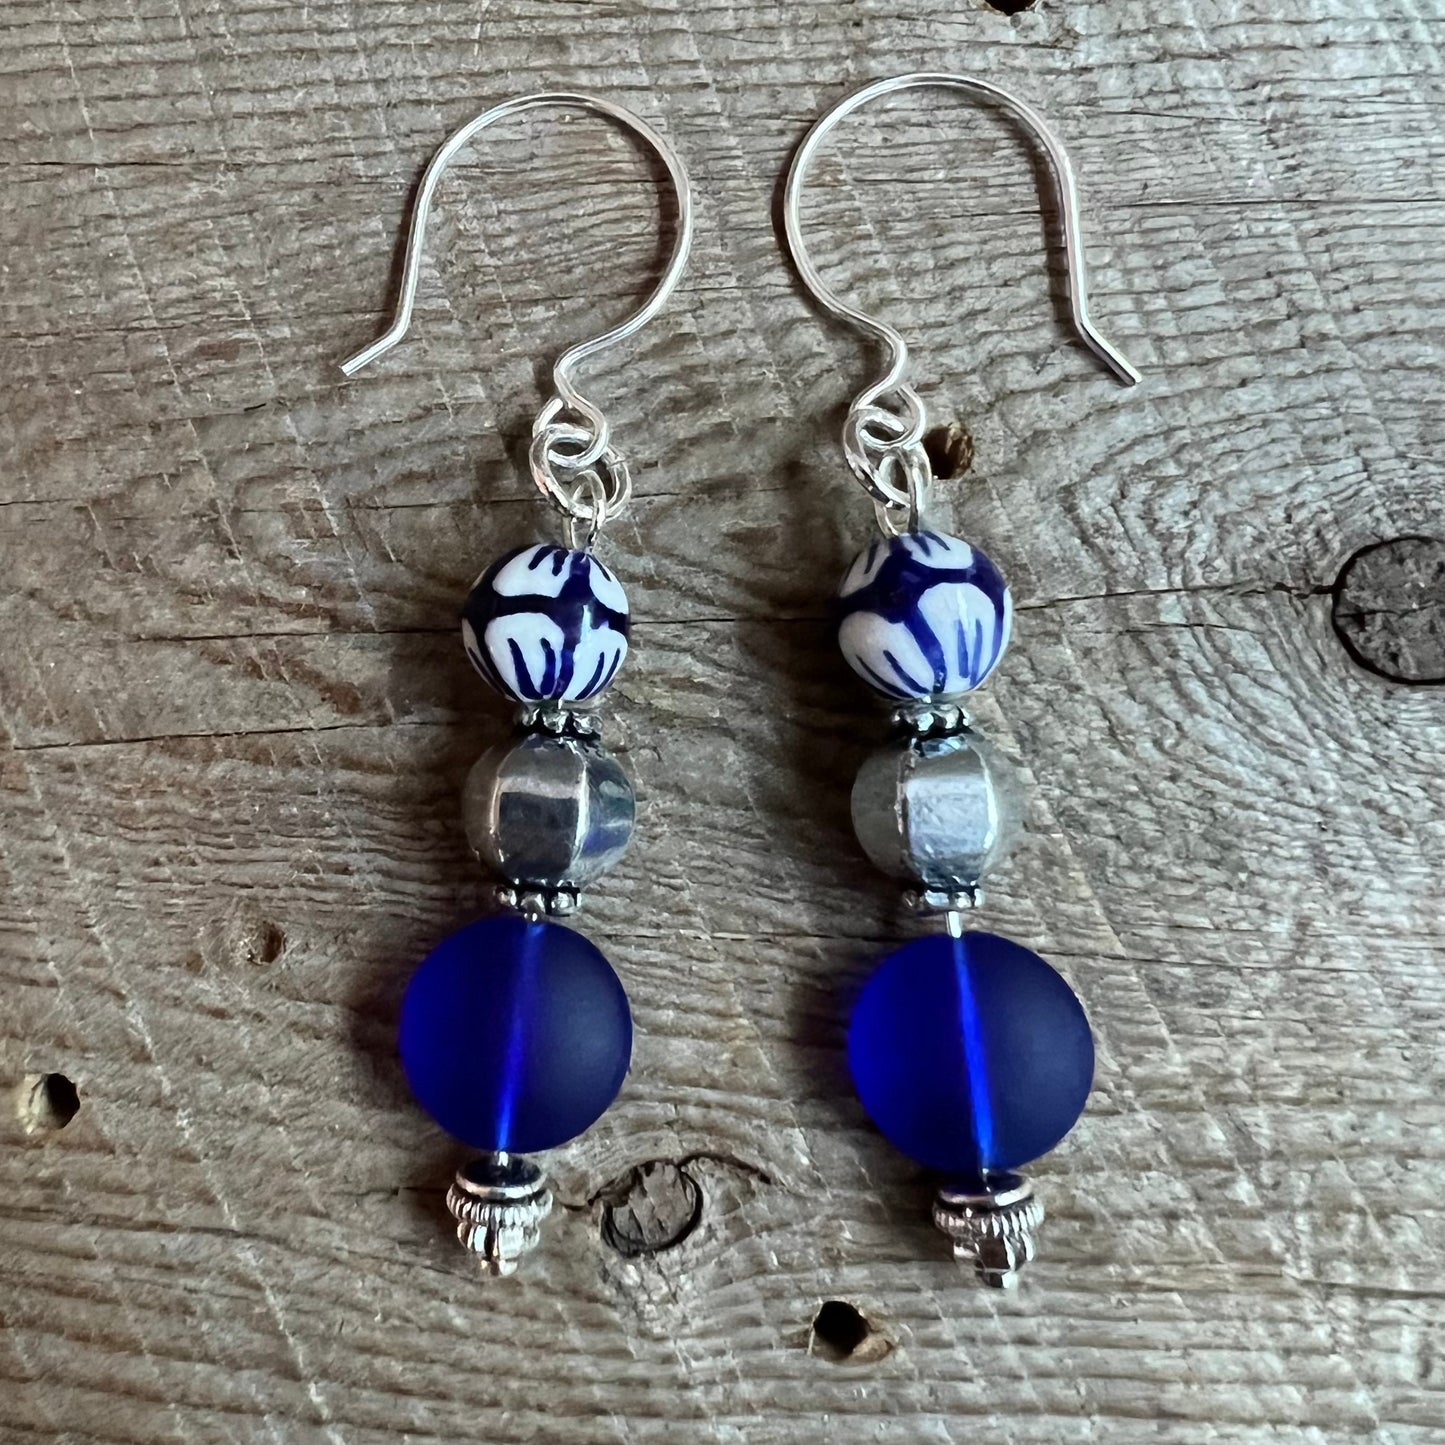 SariBlue® Boho Blue and White Ceramic Bead with a Cobalt Blue Seaglass Coin and Pewter Bead Earrings